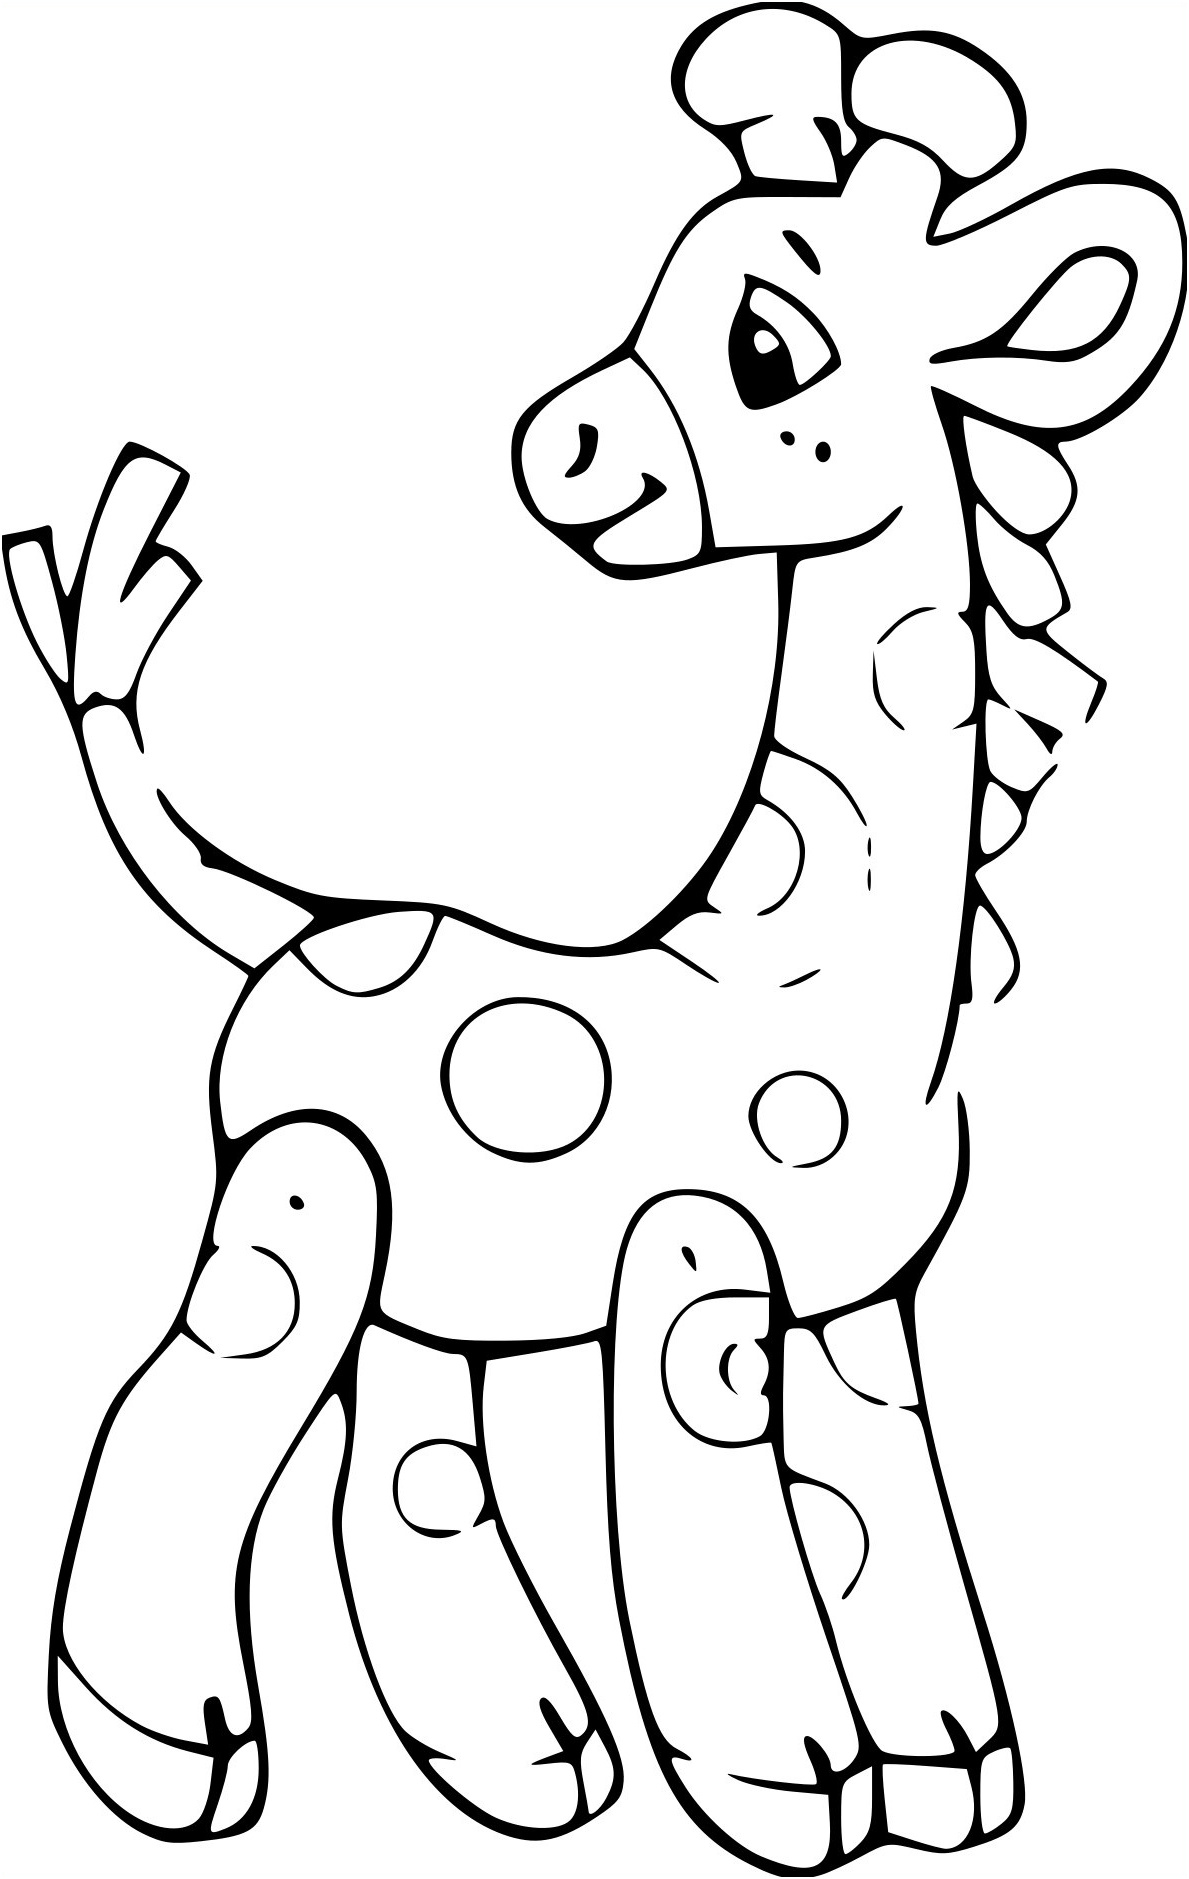 11 premier coloriage girafe images